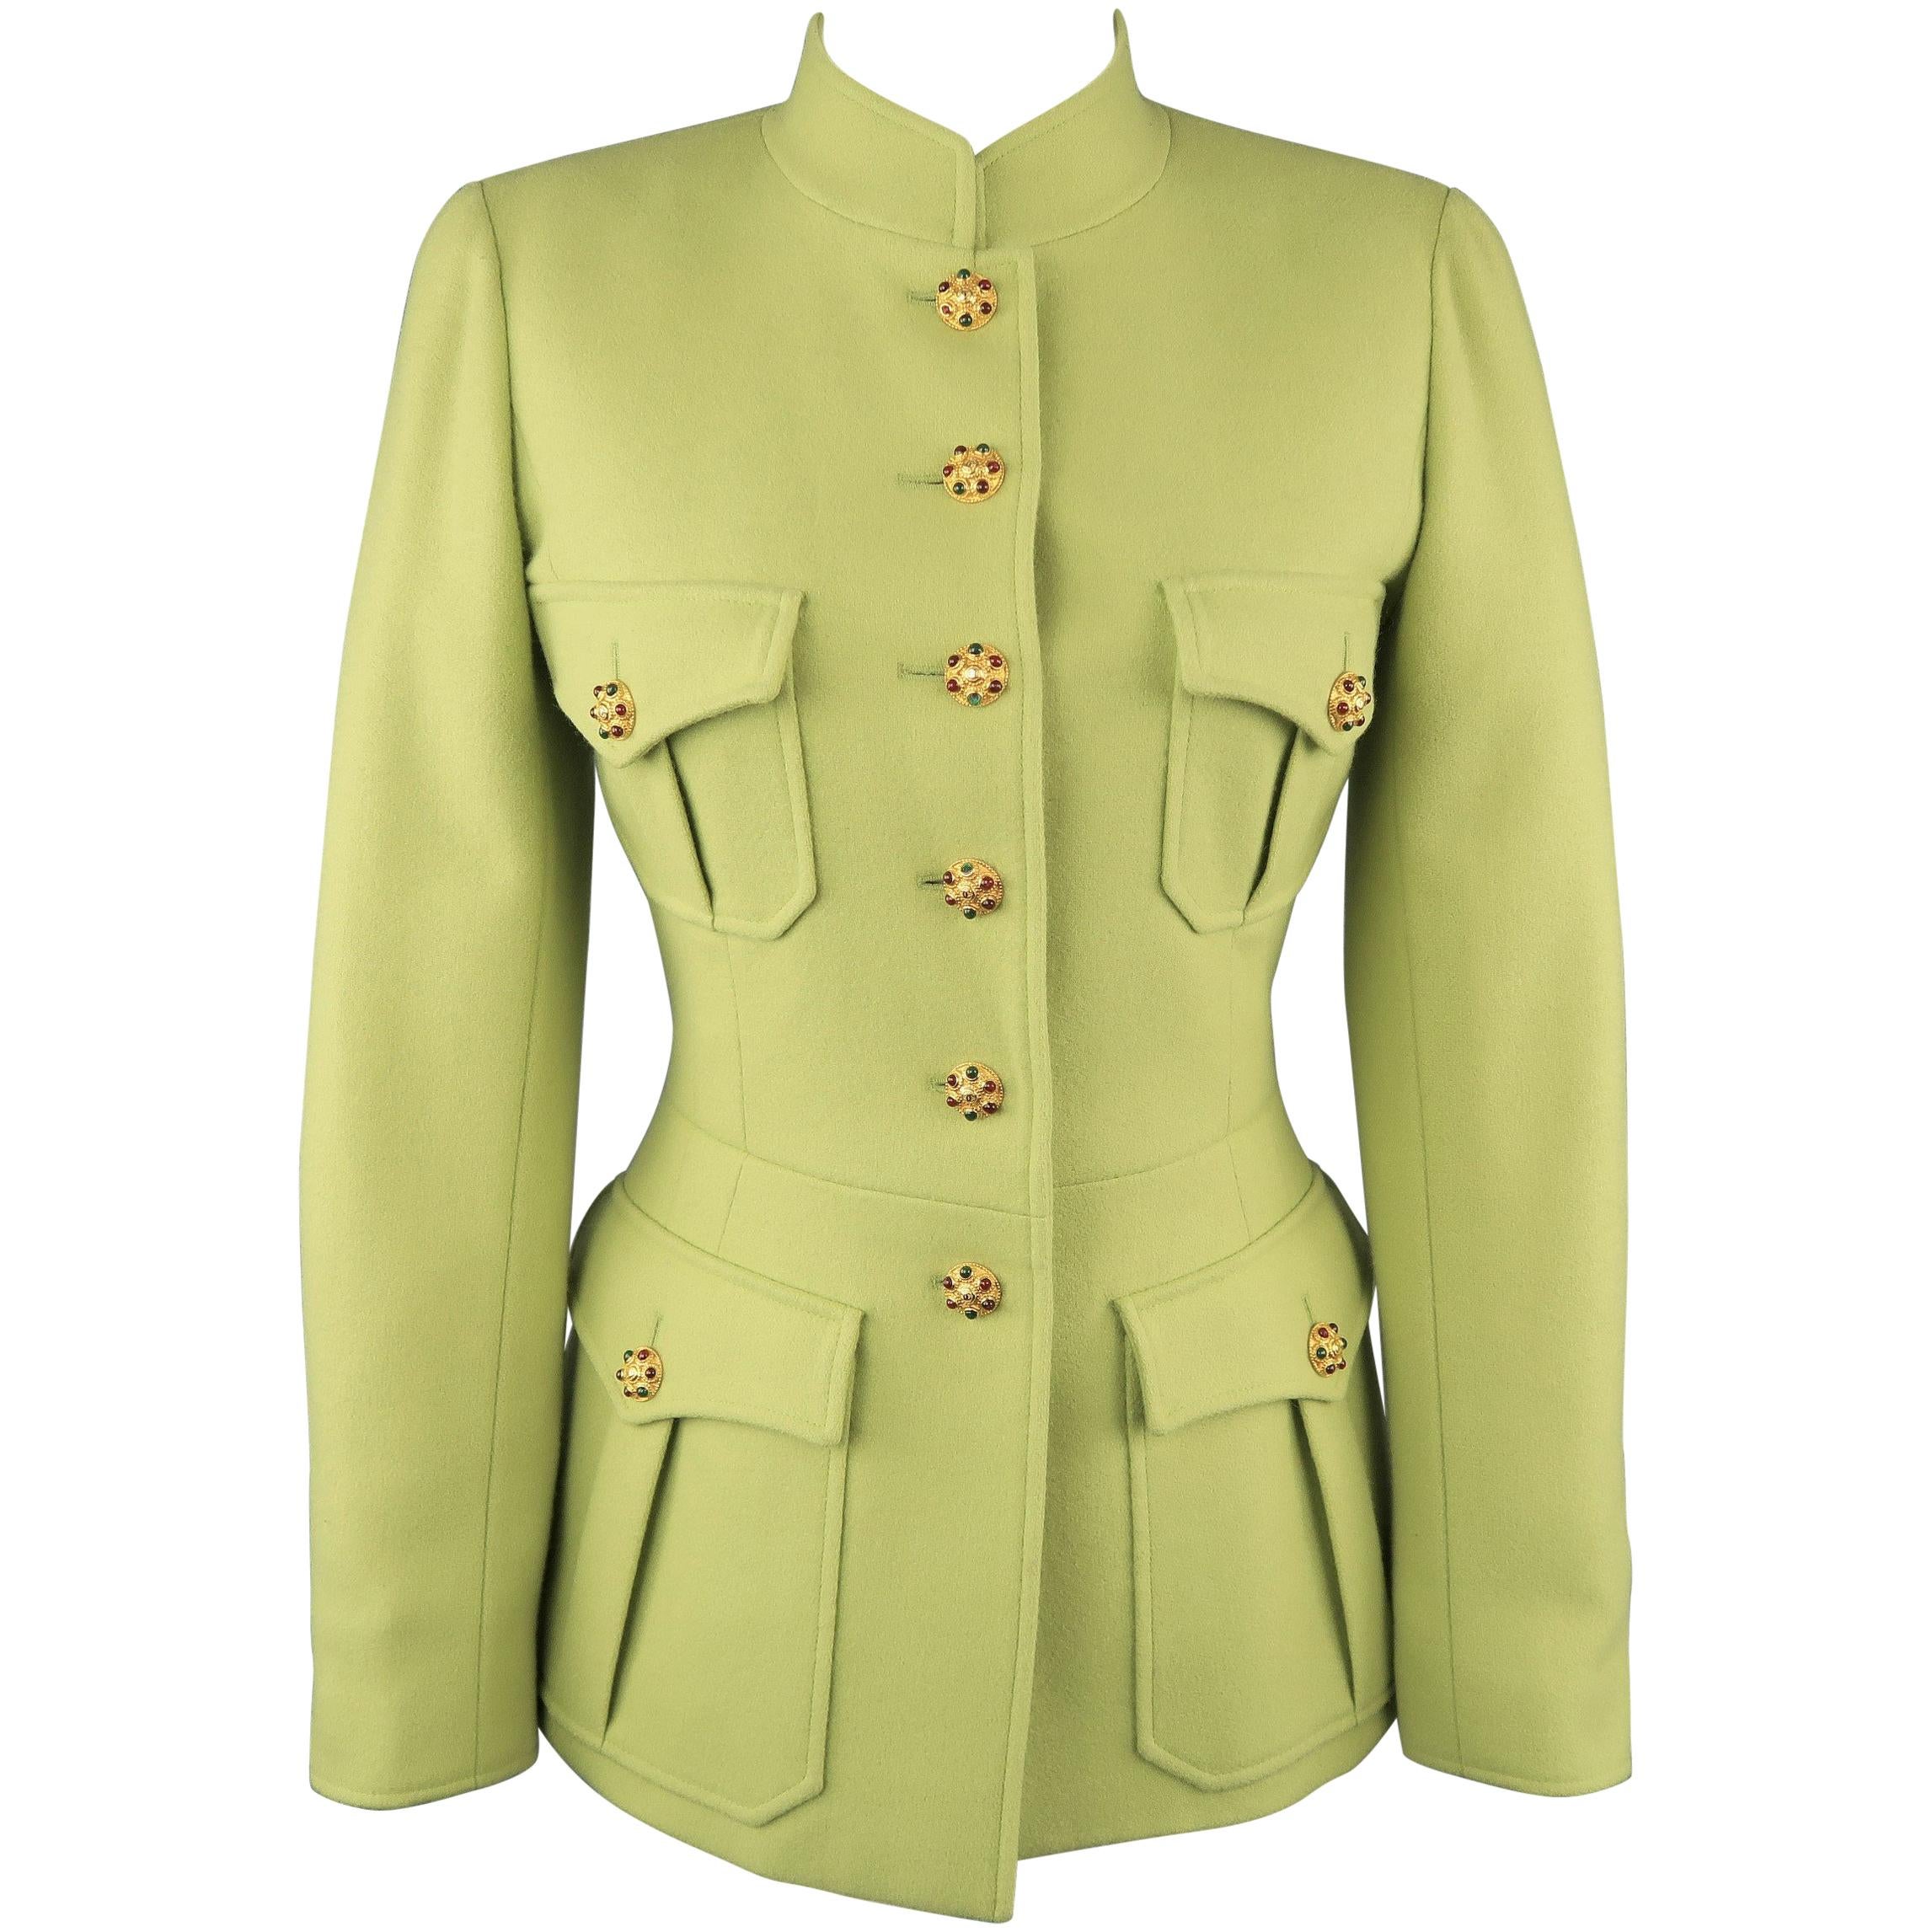 CHANEL BOUTIQUE 1990s Size 6 Light Green Wool Byzantine Button Military Jacket